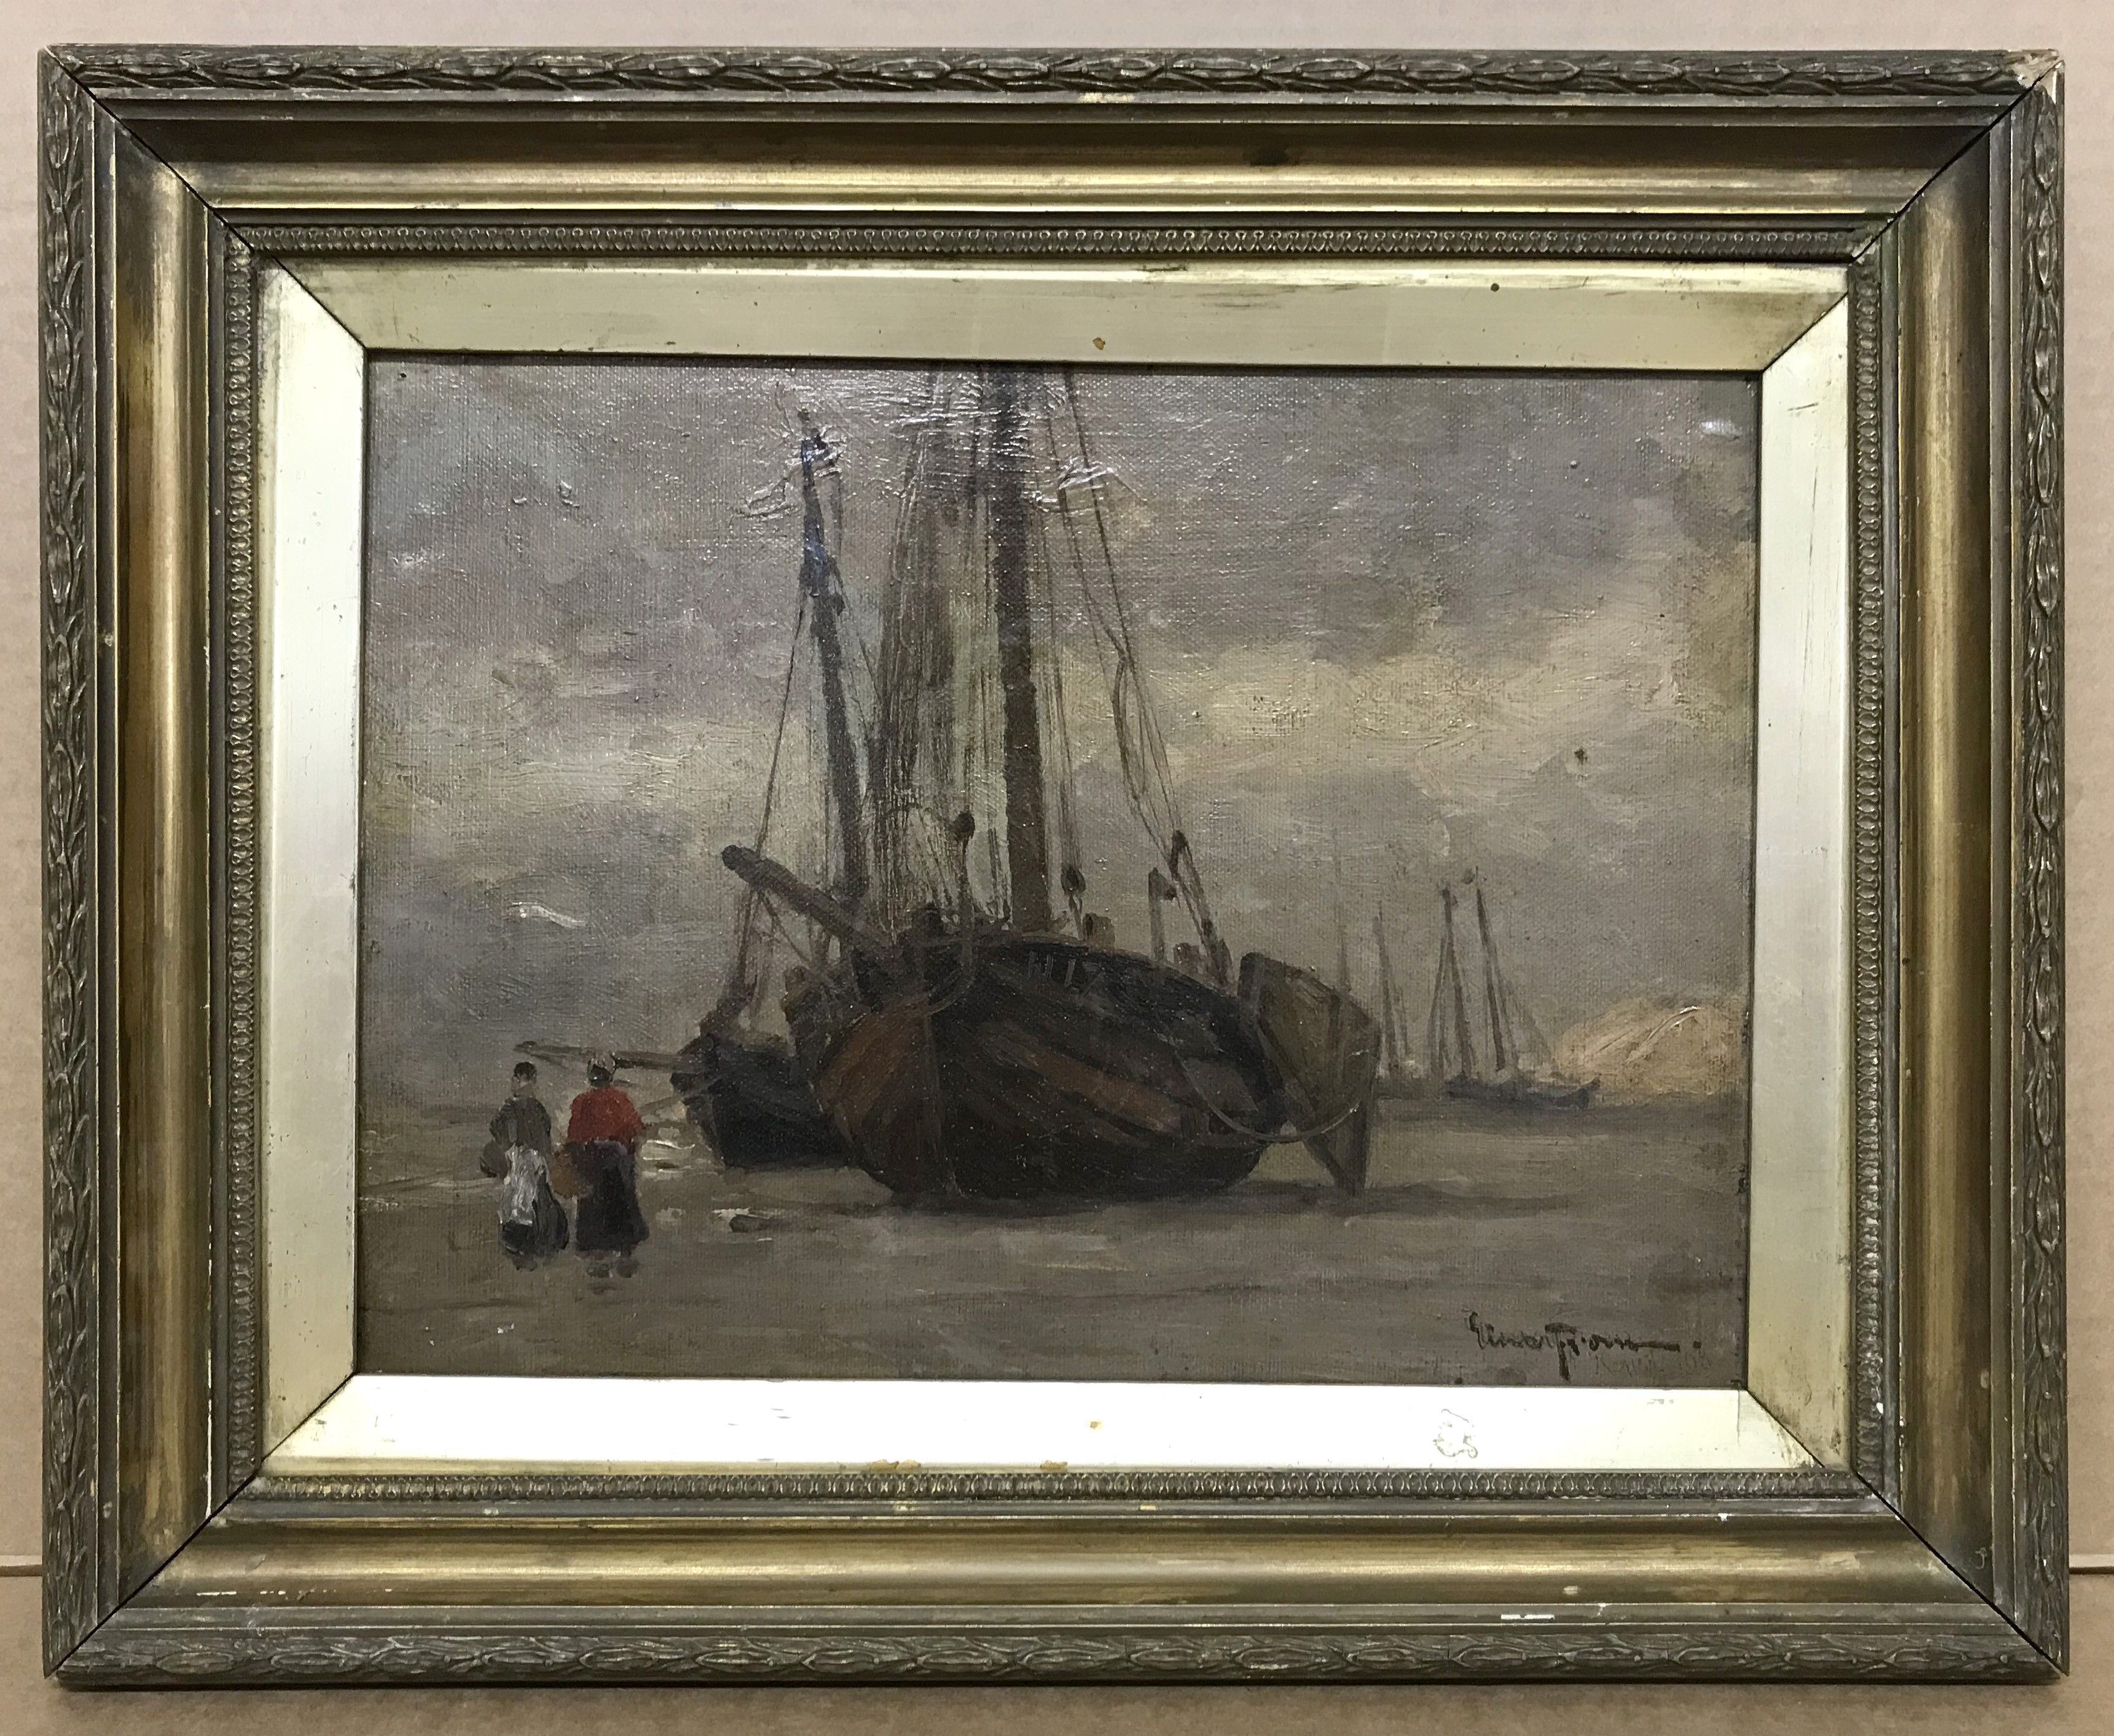 Einar From 1872-1972 Norwegian. Oil on panel. “Figures and Boats on the Beach”. Signed.